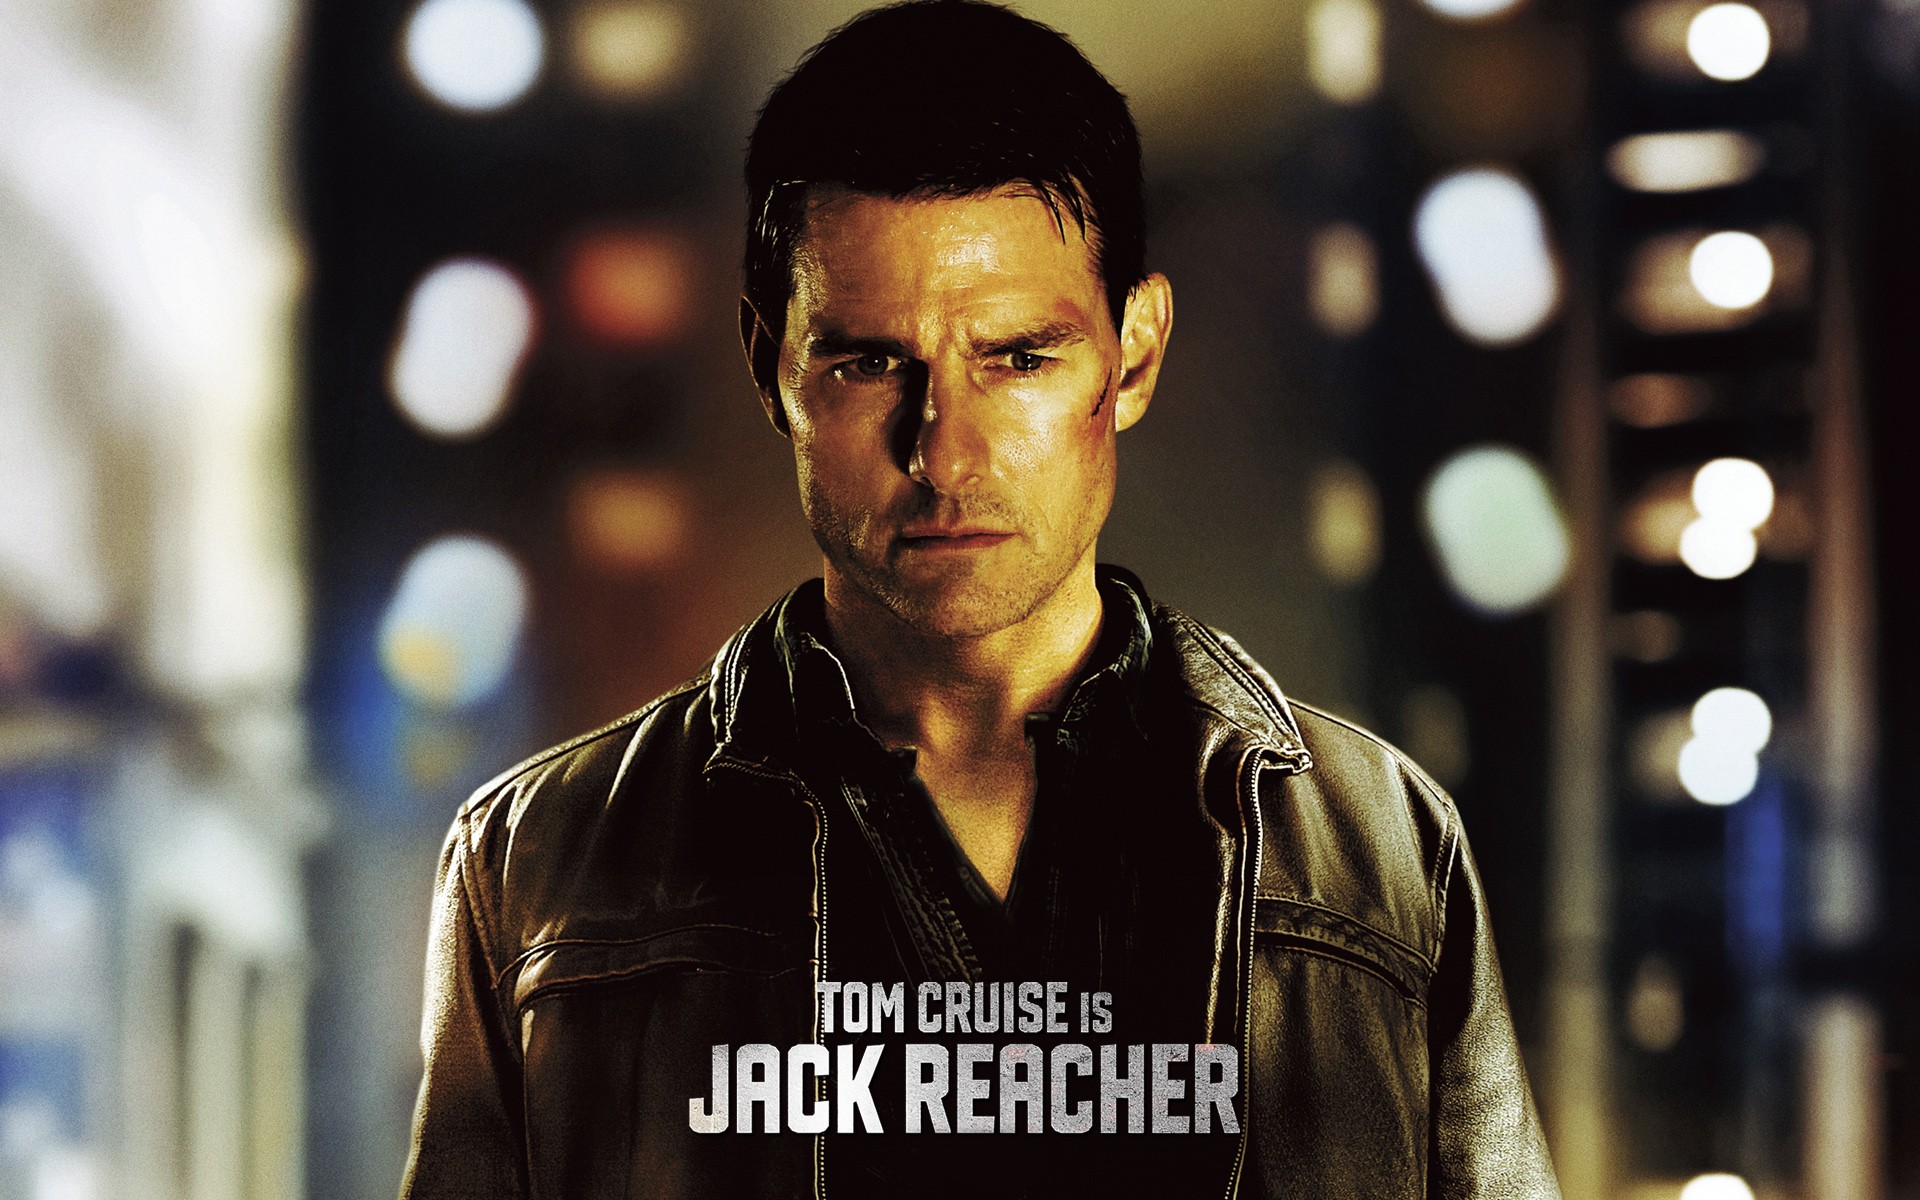 Wallpapers movies person Tom Cruise on the desktop